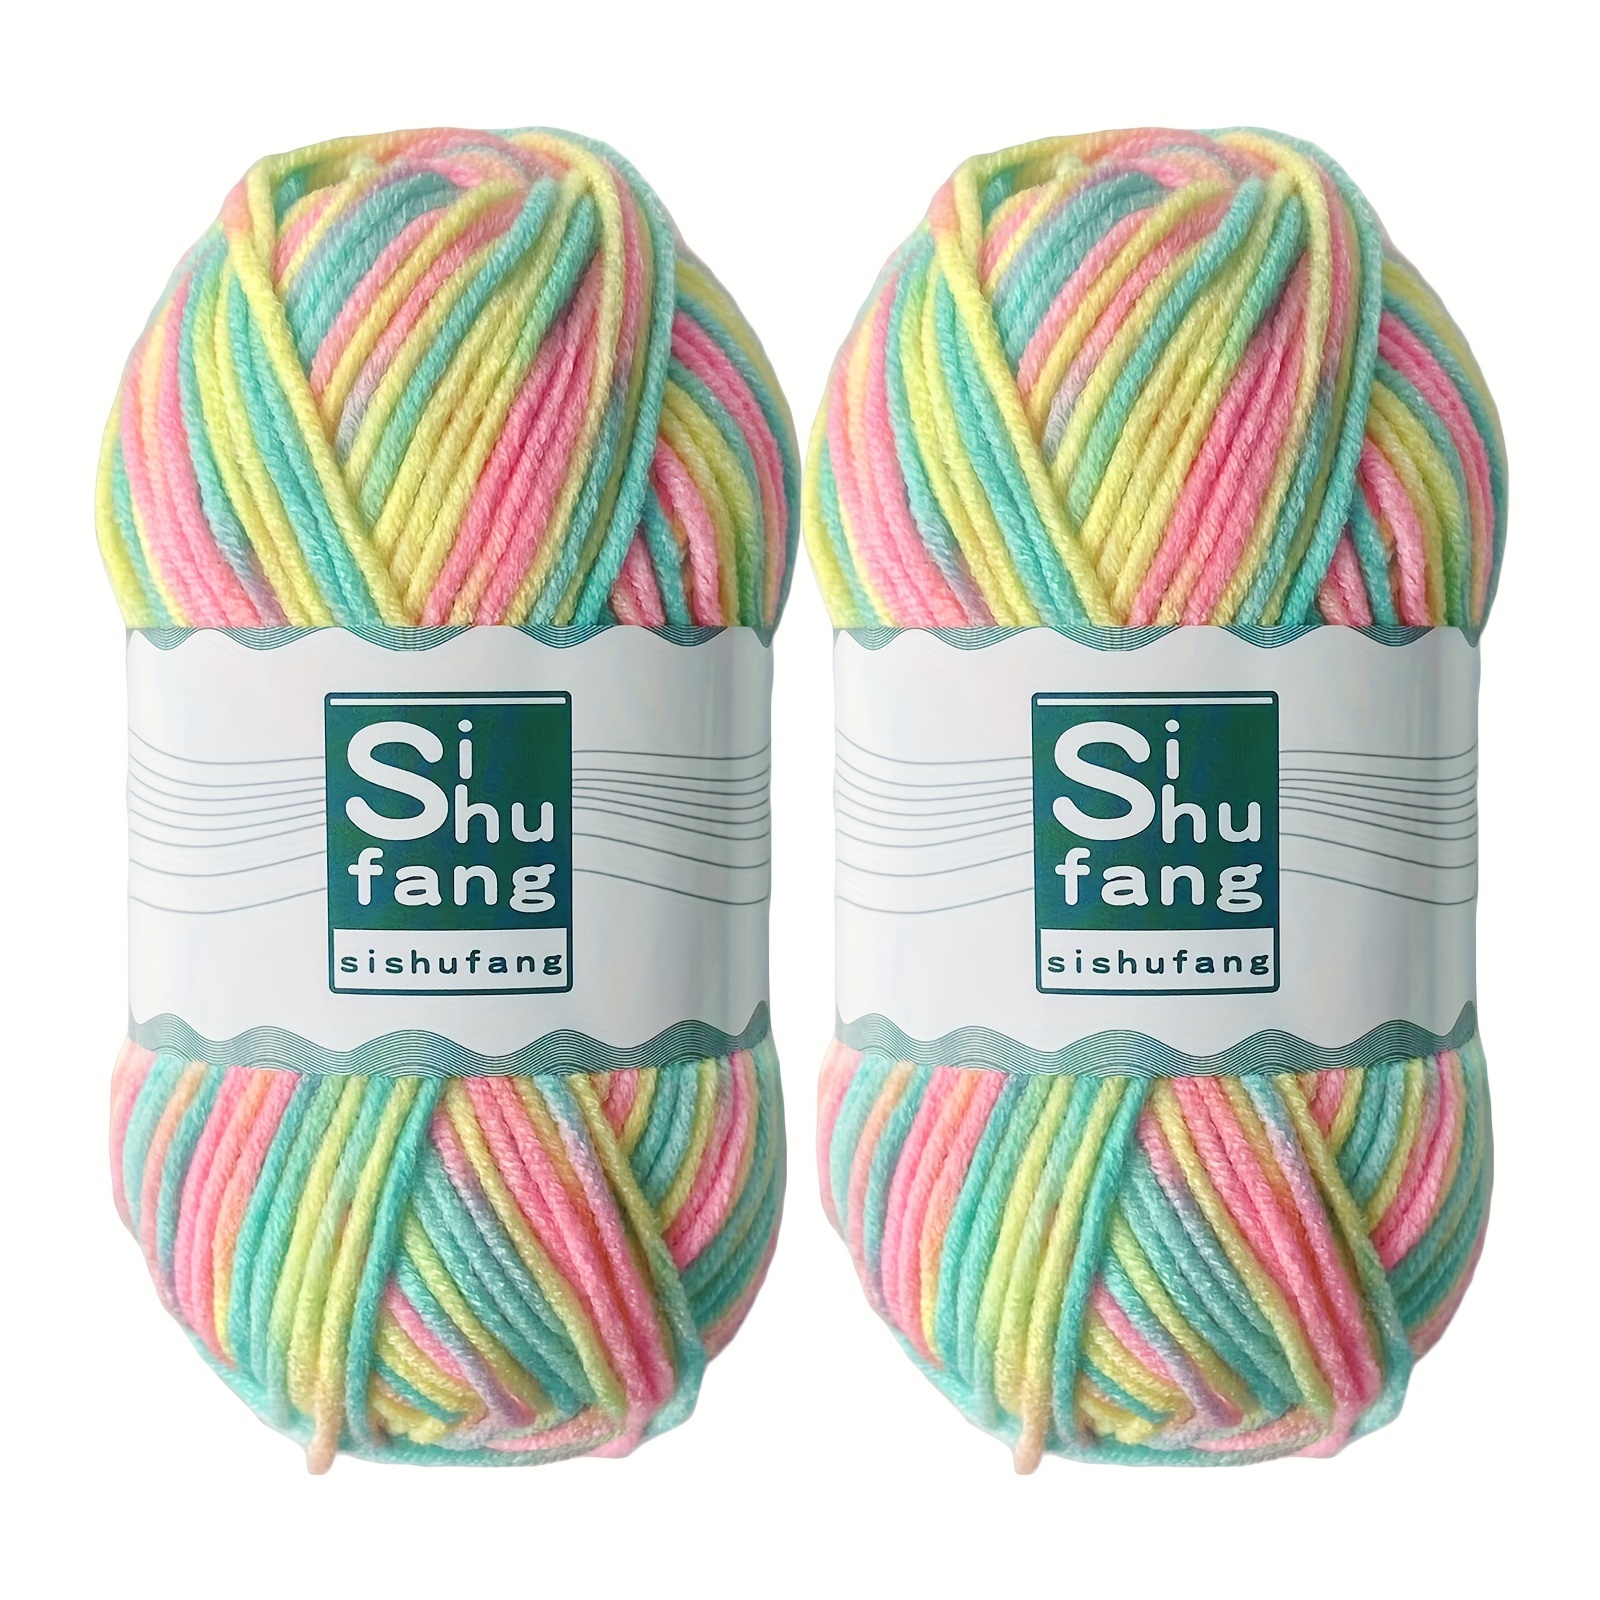 

2pcs 5 Strands Rainbow Milk Cotton Yarn, Assorted Colors, 70% Acrylic, 30% Wool Blended Soft Yarn For Hand Crochet And Knitting, Suitable For Knitting Hats, Scarves, Gloves, Etc 48g/pc